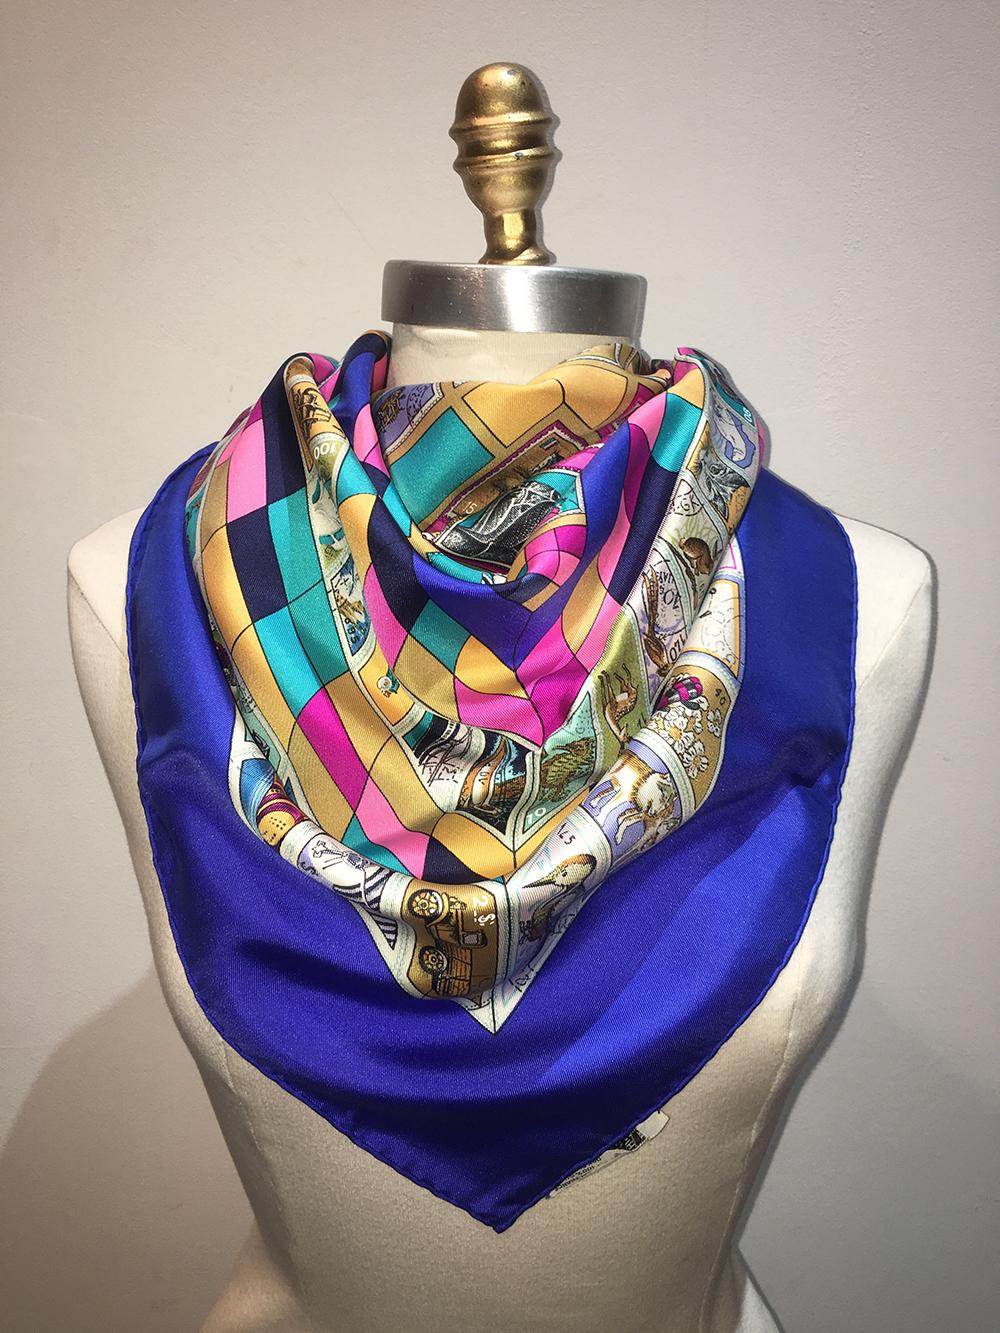 Hermes Vintage Blue Correspondence Silk Scarf c1990 in excellent condition. Original silk screen design by Cathy Latham c1990 features various multicolor stamp print and color block pattern surrounded by a blue border. 100% silk, hand rolled hem,